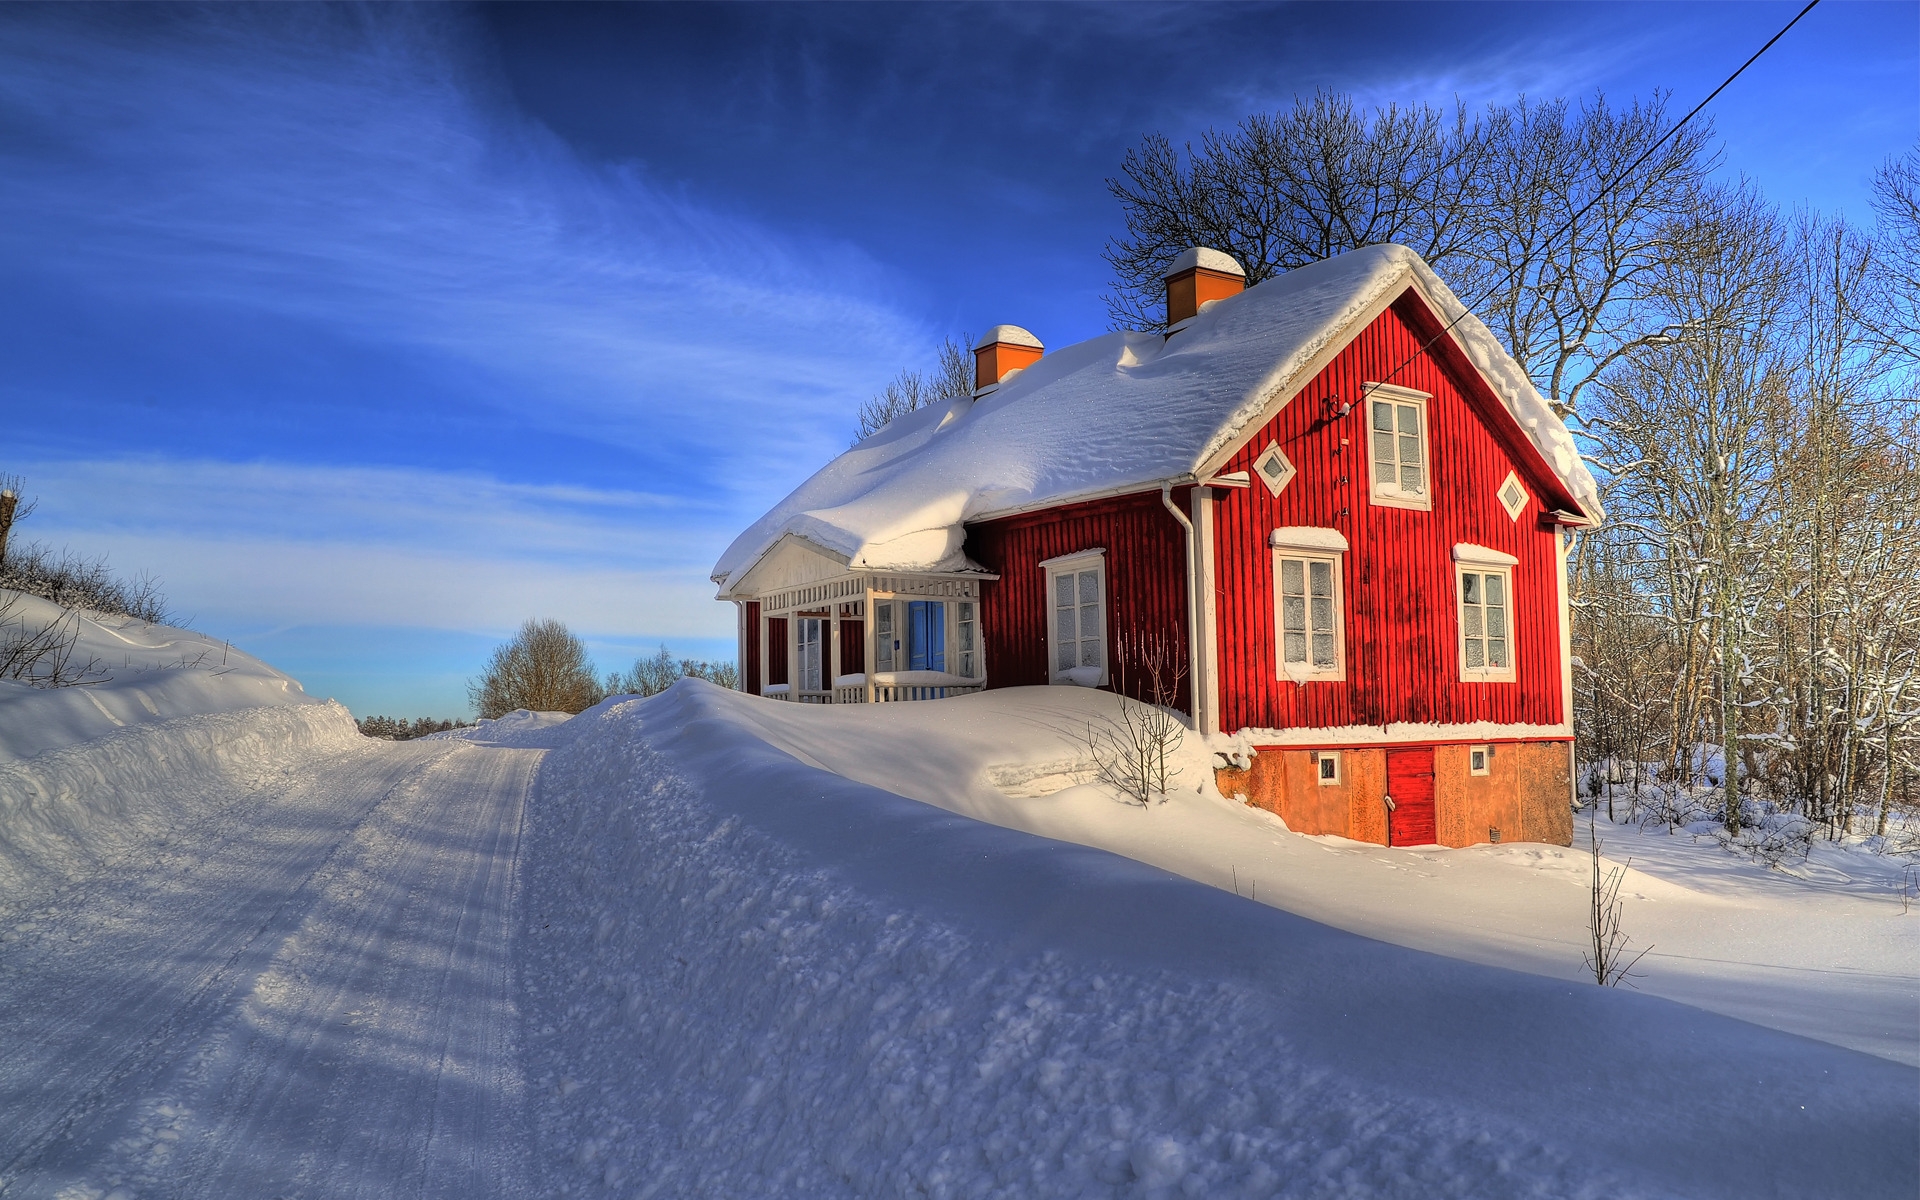 House Between Snow for 1920 x 1200 widescreen resolution